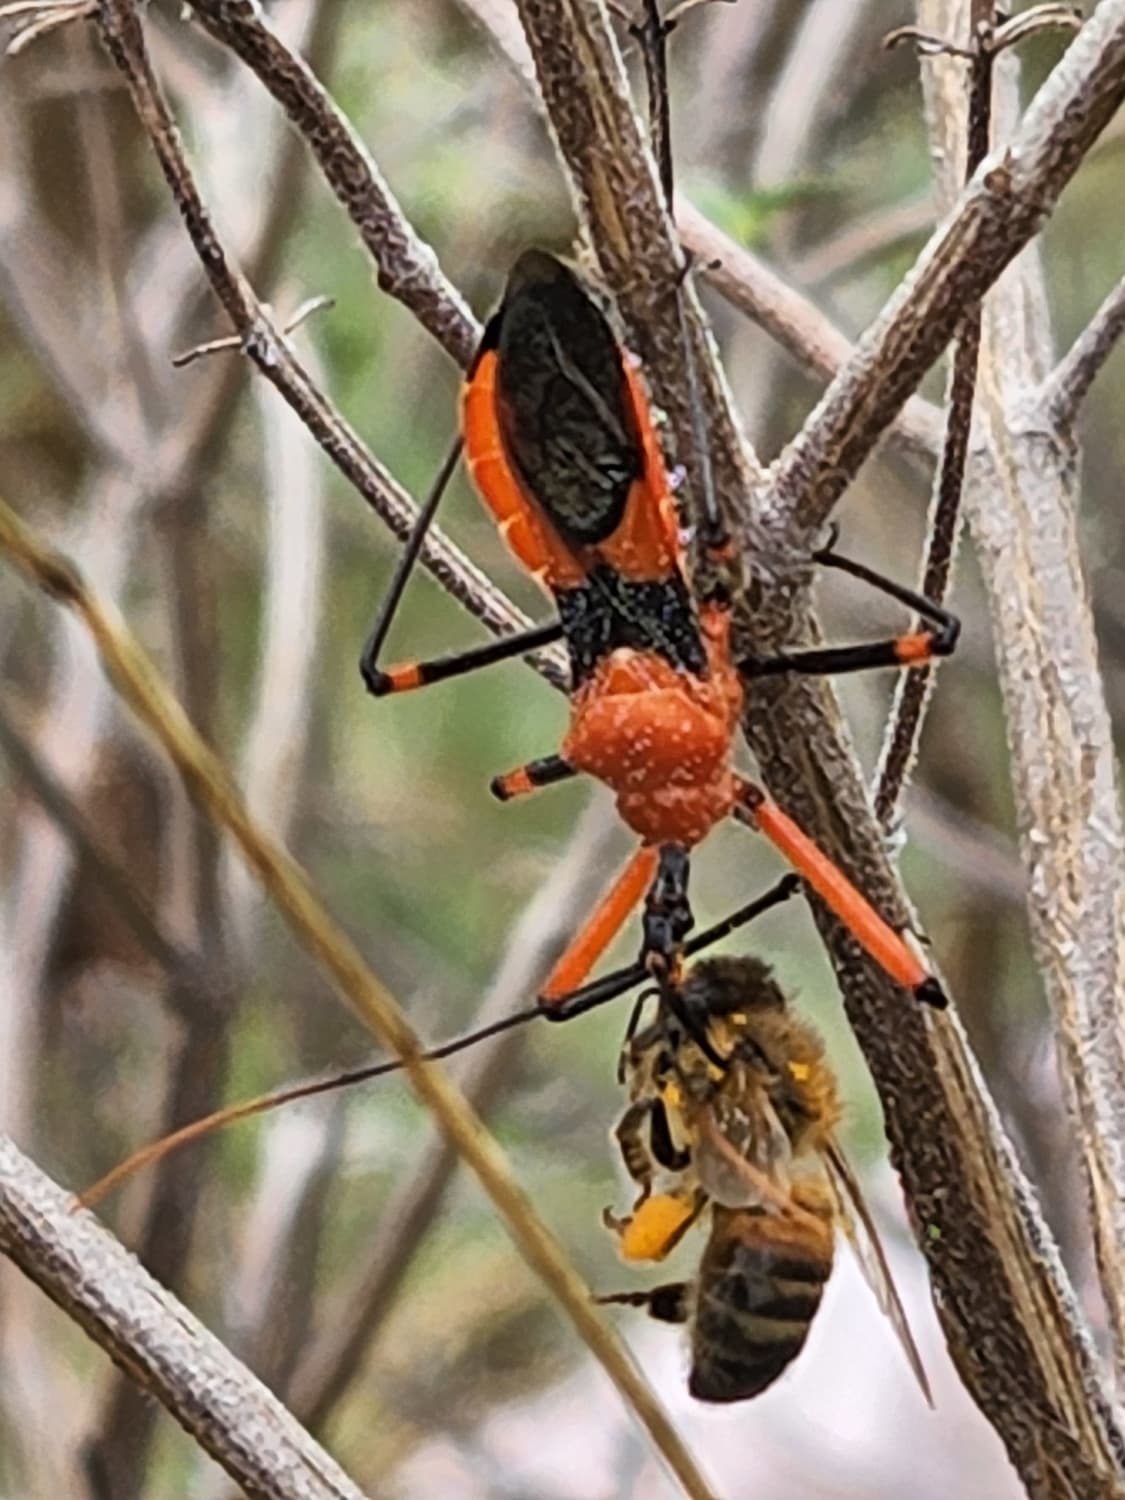  red-backed spider